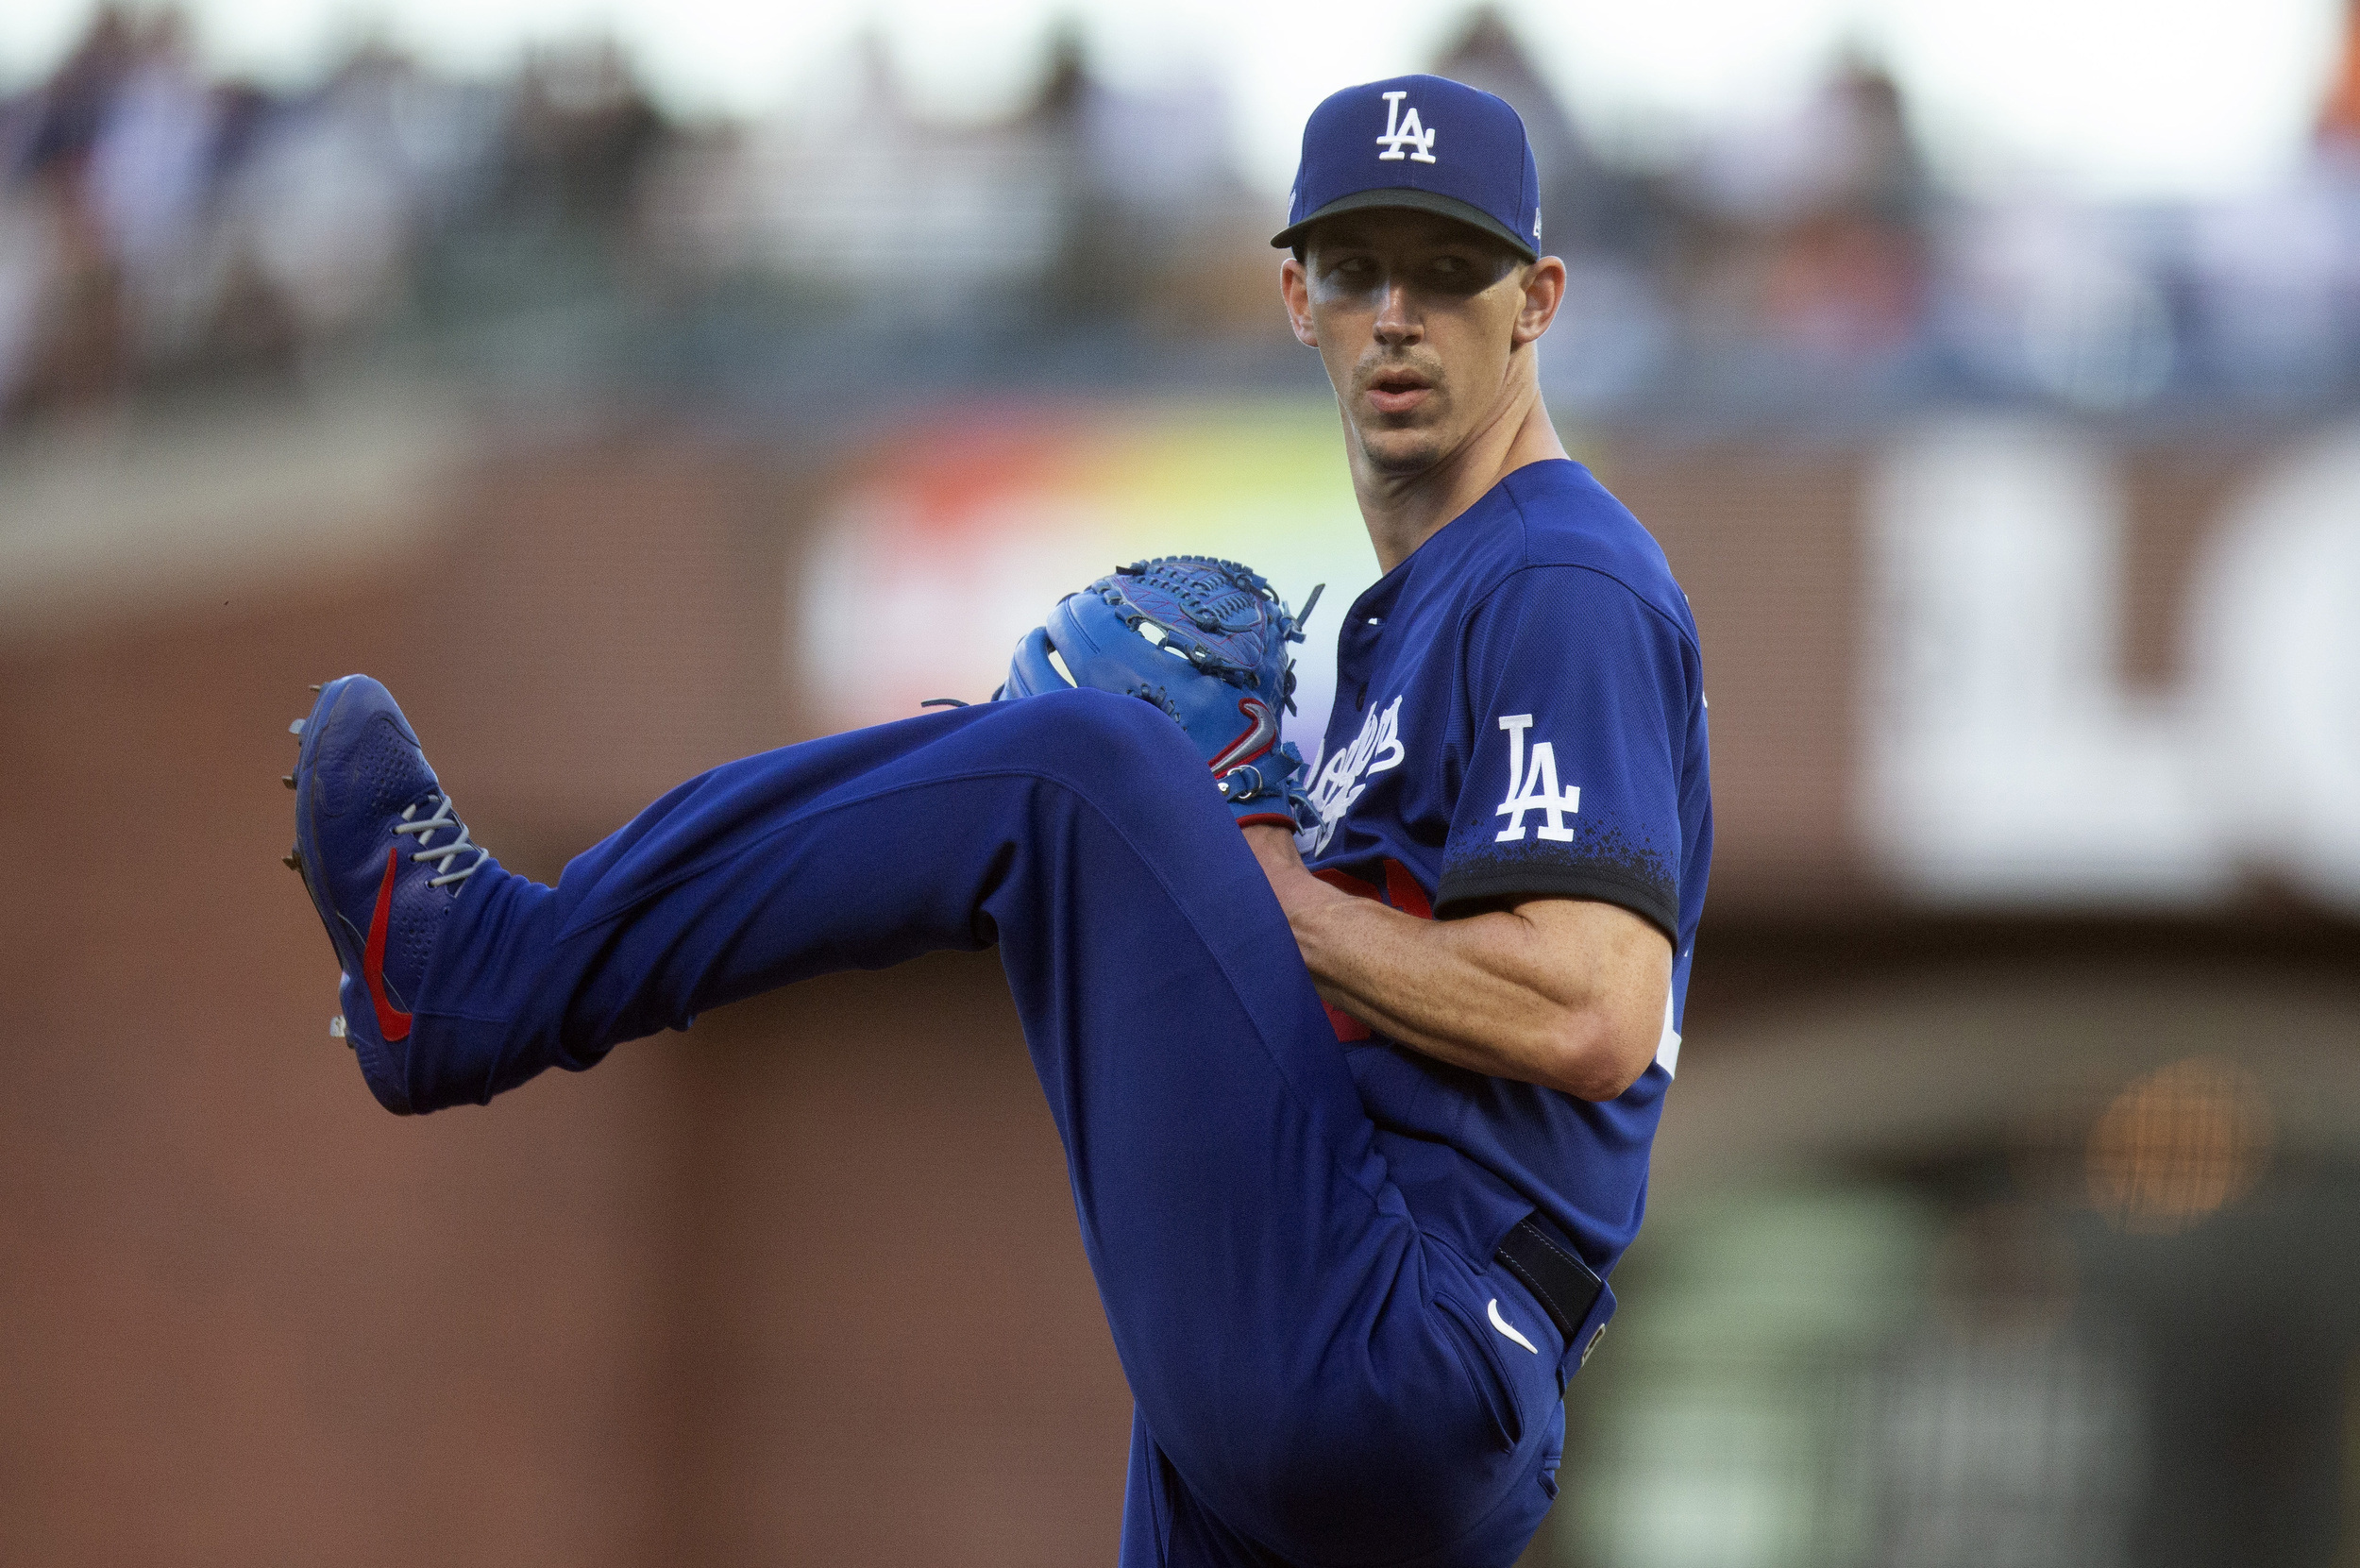 Walker Buehler Shares His Take on the Rising Tommy John Rate